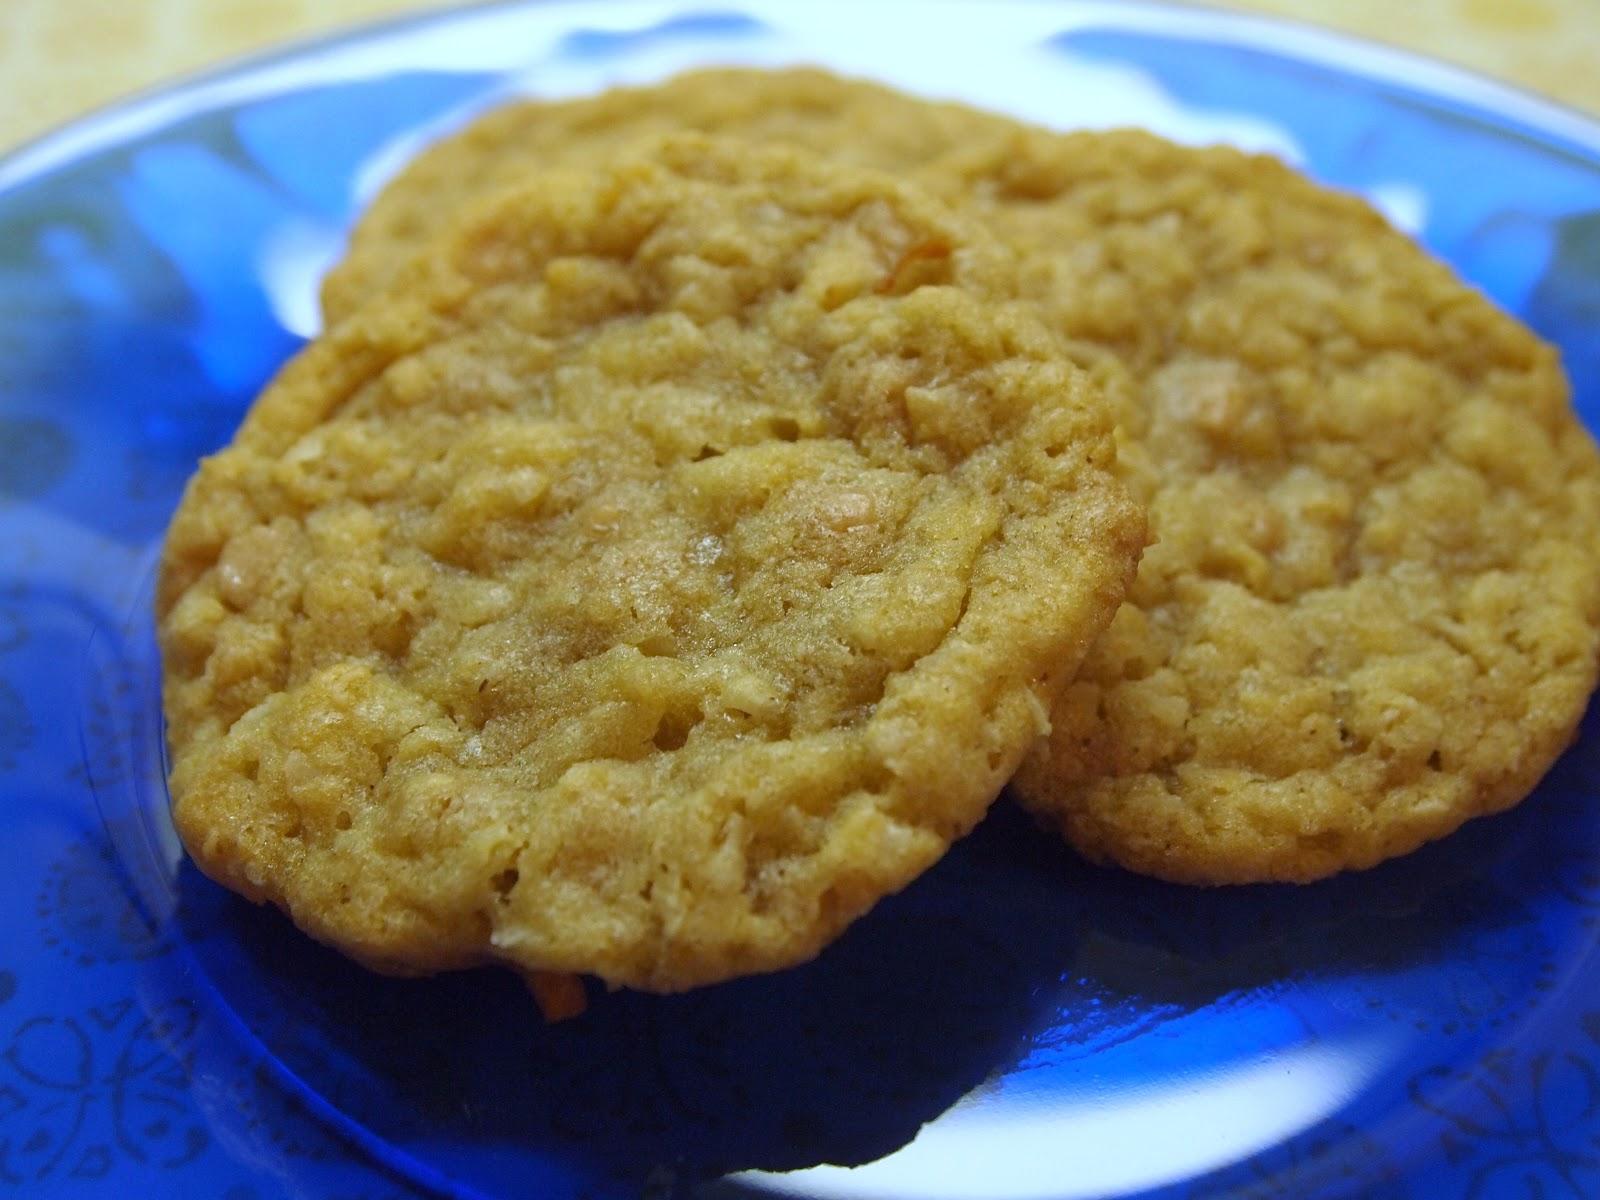 Coconut-Toffee Oatmeal Cookies